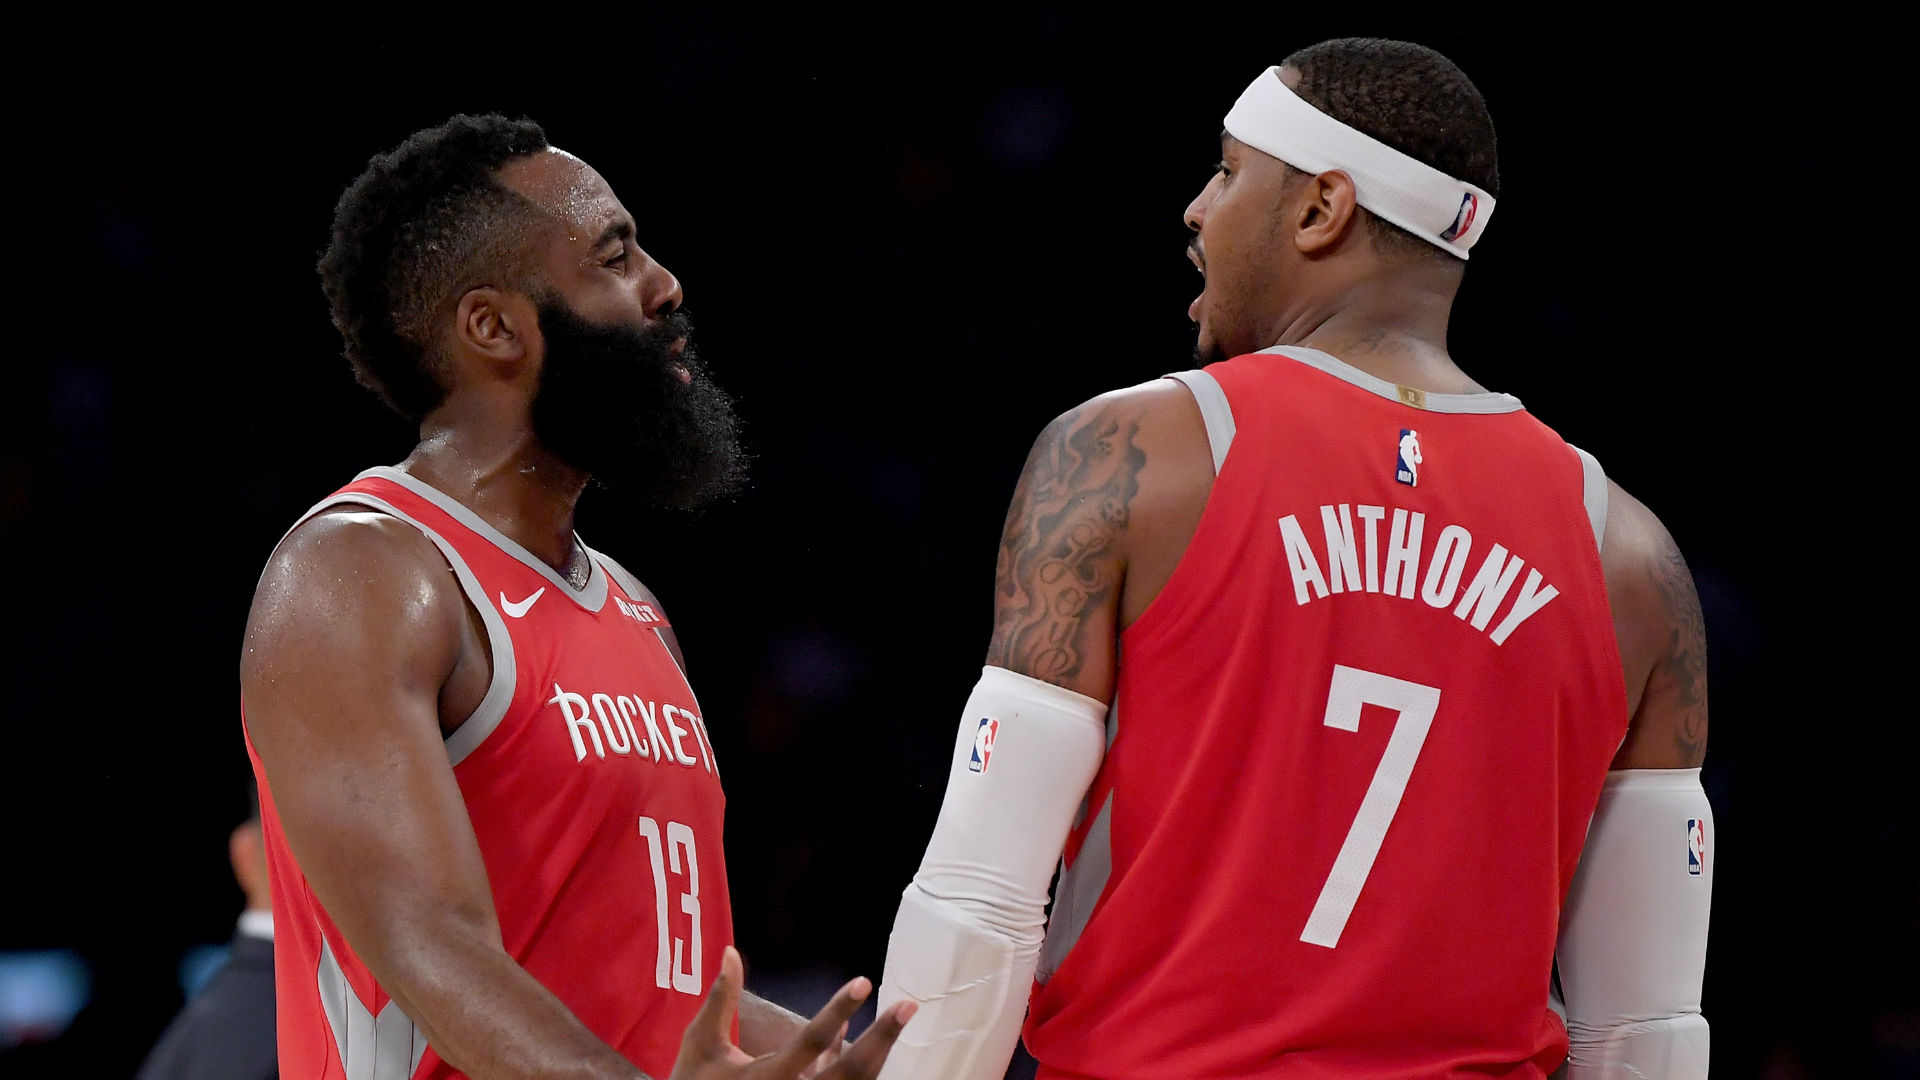 Houston Rockets star James Harden was upset to see Carmelo Anthony leave the NBA team.